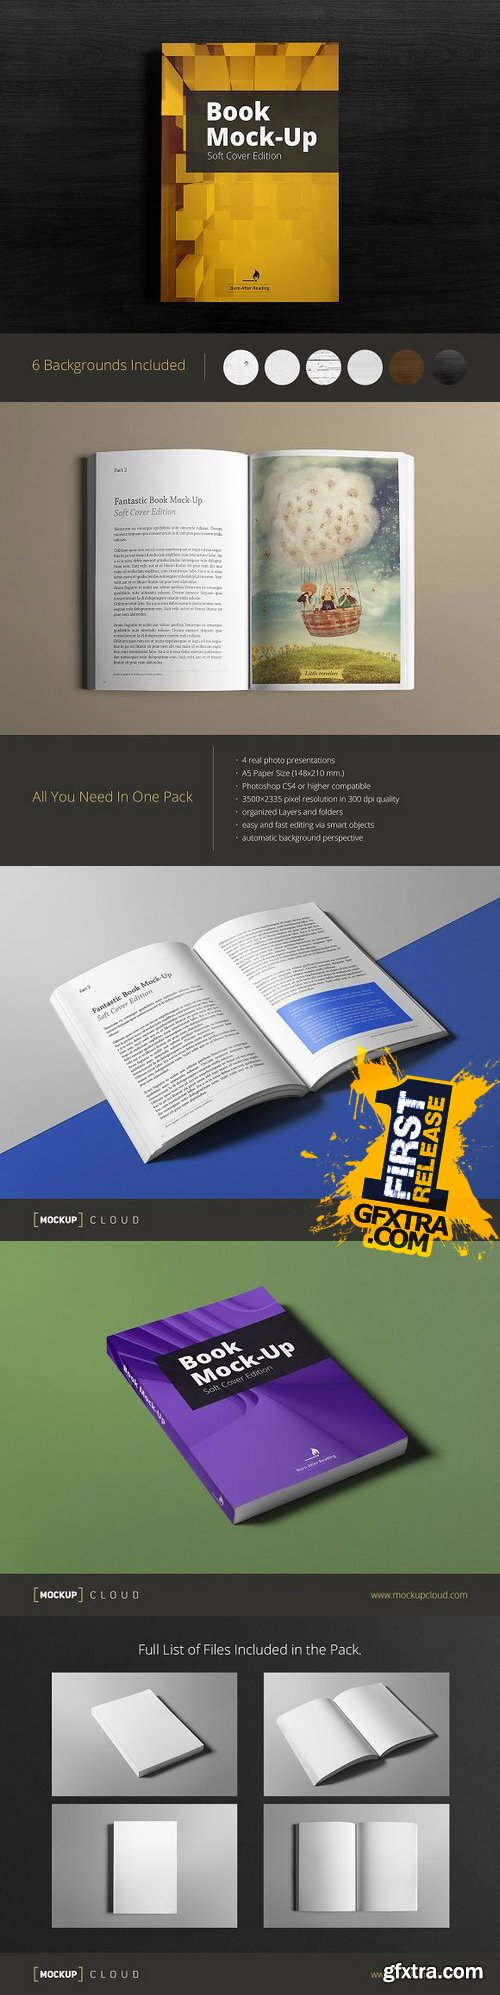 CM - Book Mock-Up / Soft Cover Edition 166768